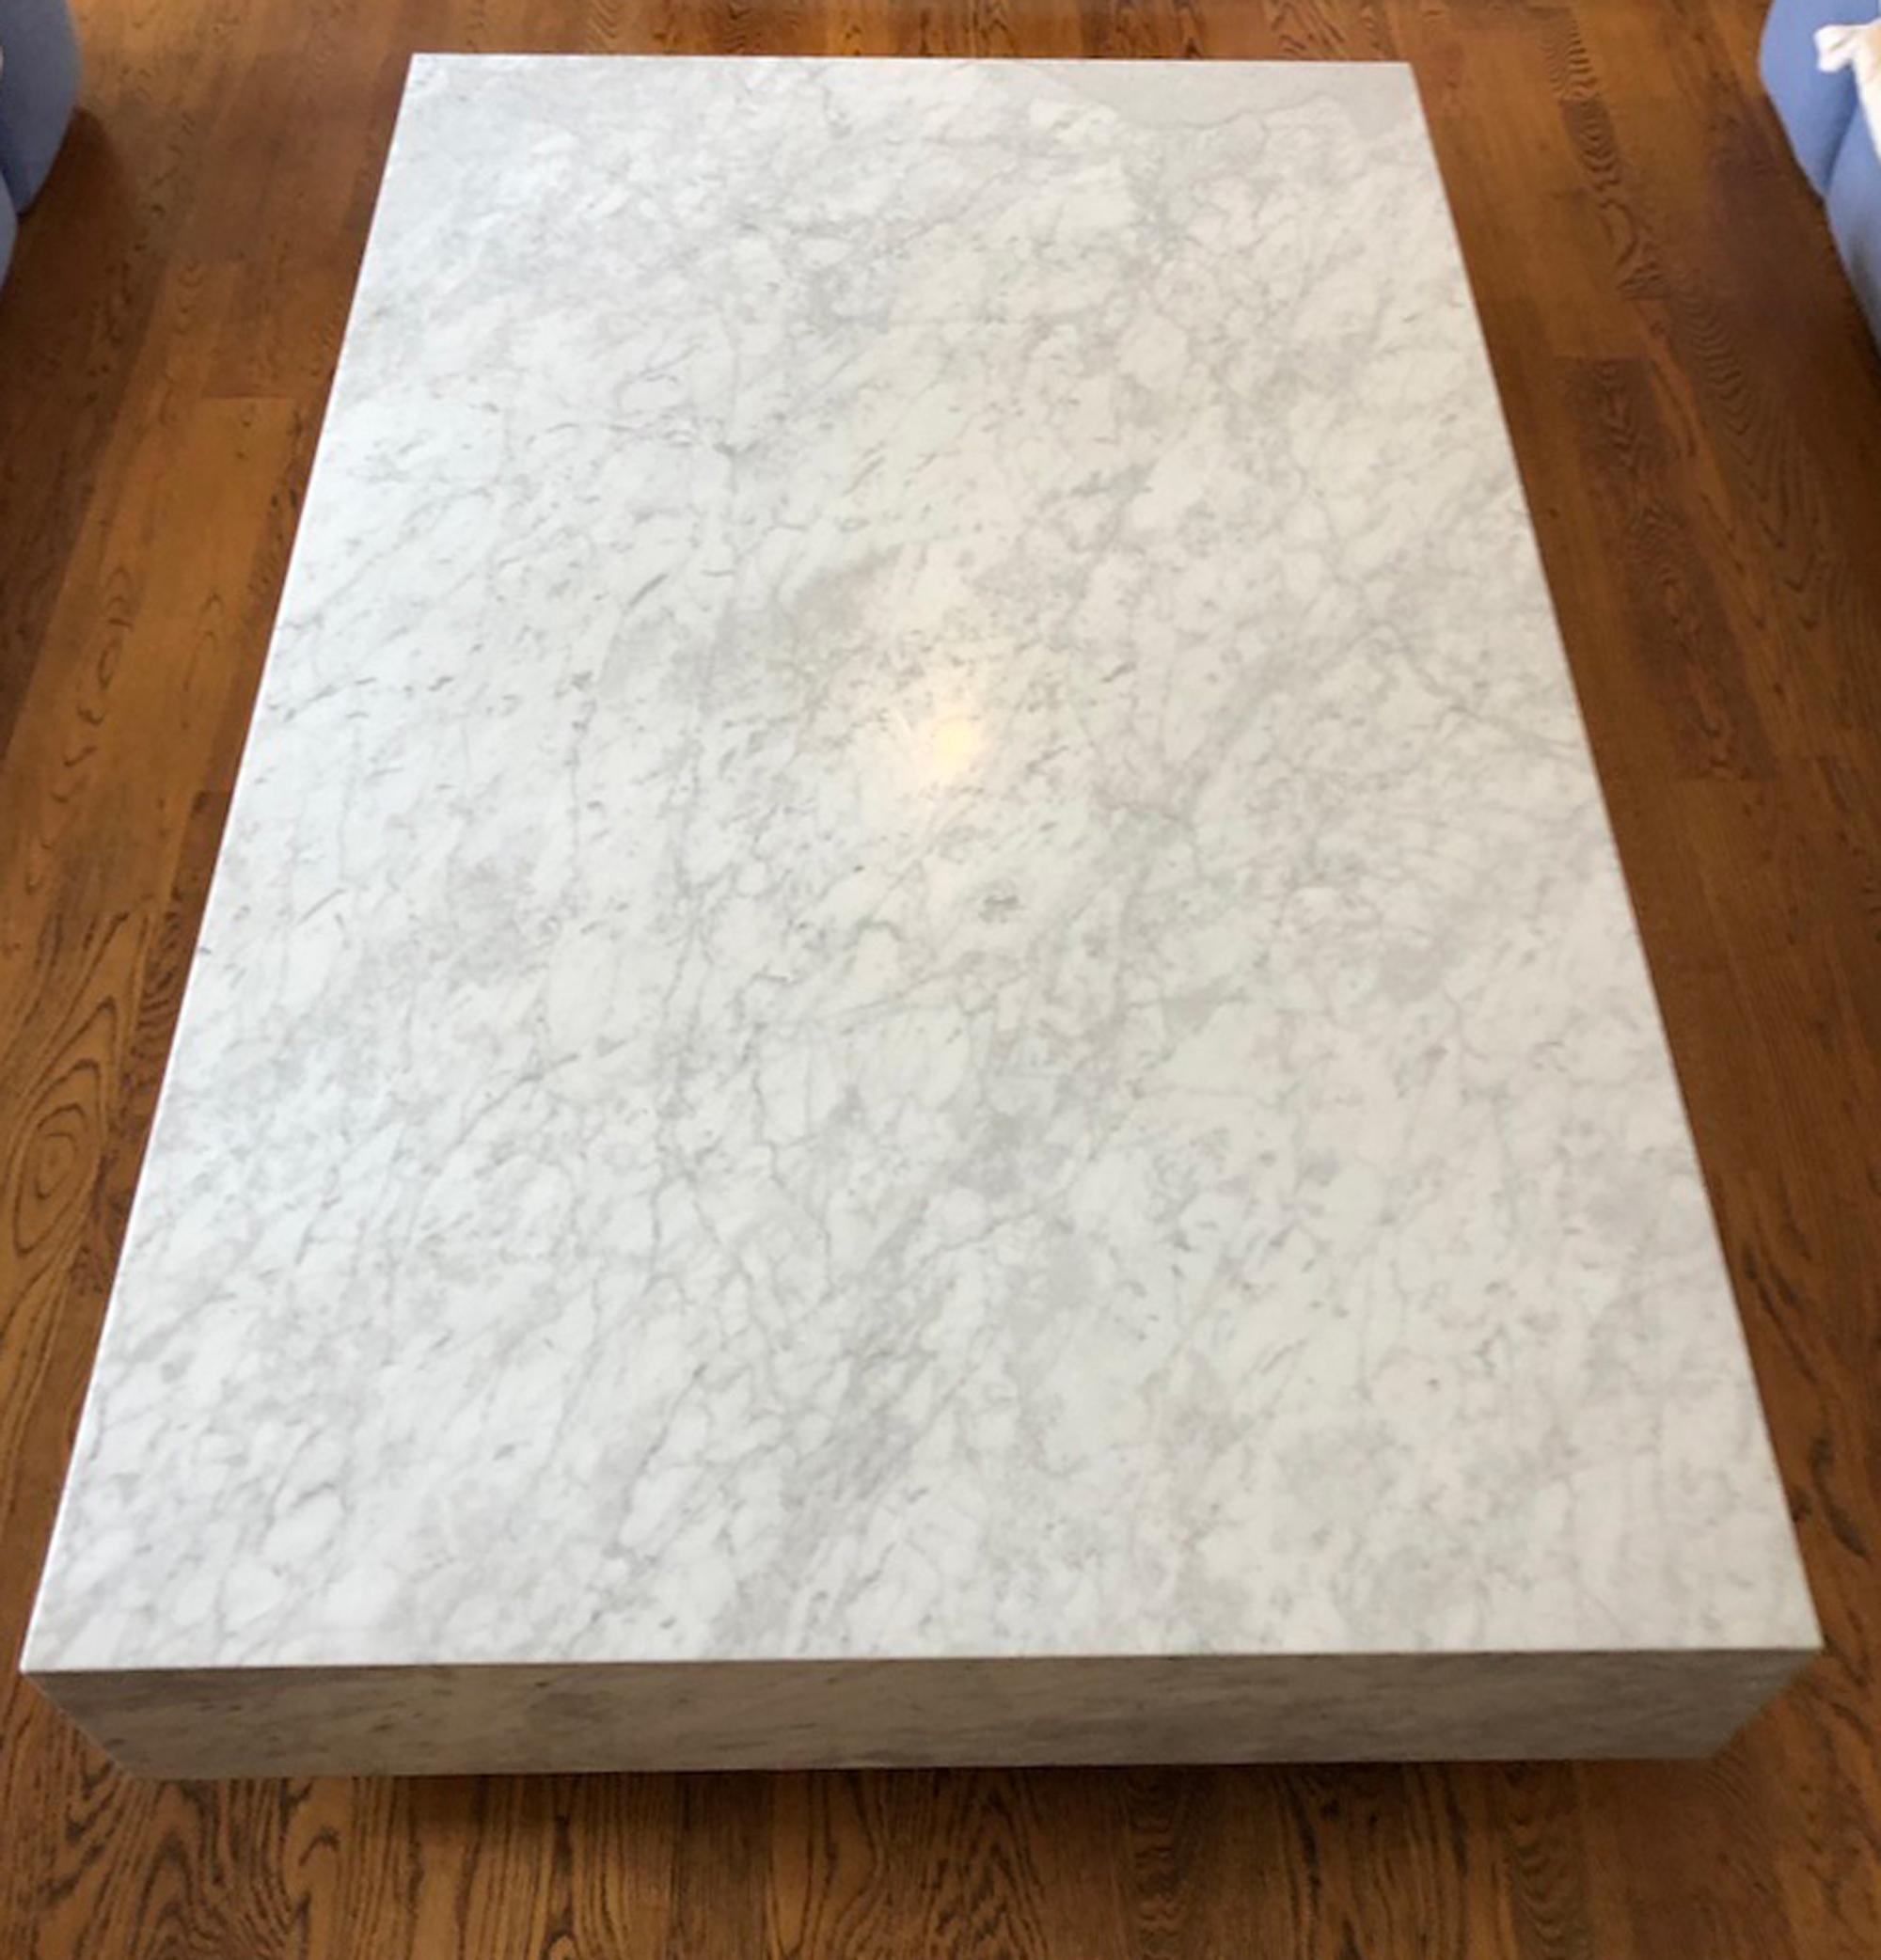 Handcrafted from slabs of marble on a sturdy wooden frame.
Thick, overhanging top is set on a low, inset base to create a floating effect.
Hidden casters allow ease of placement. Casters are not removable and do not lock.
Variations in the